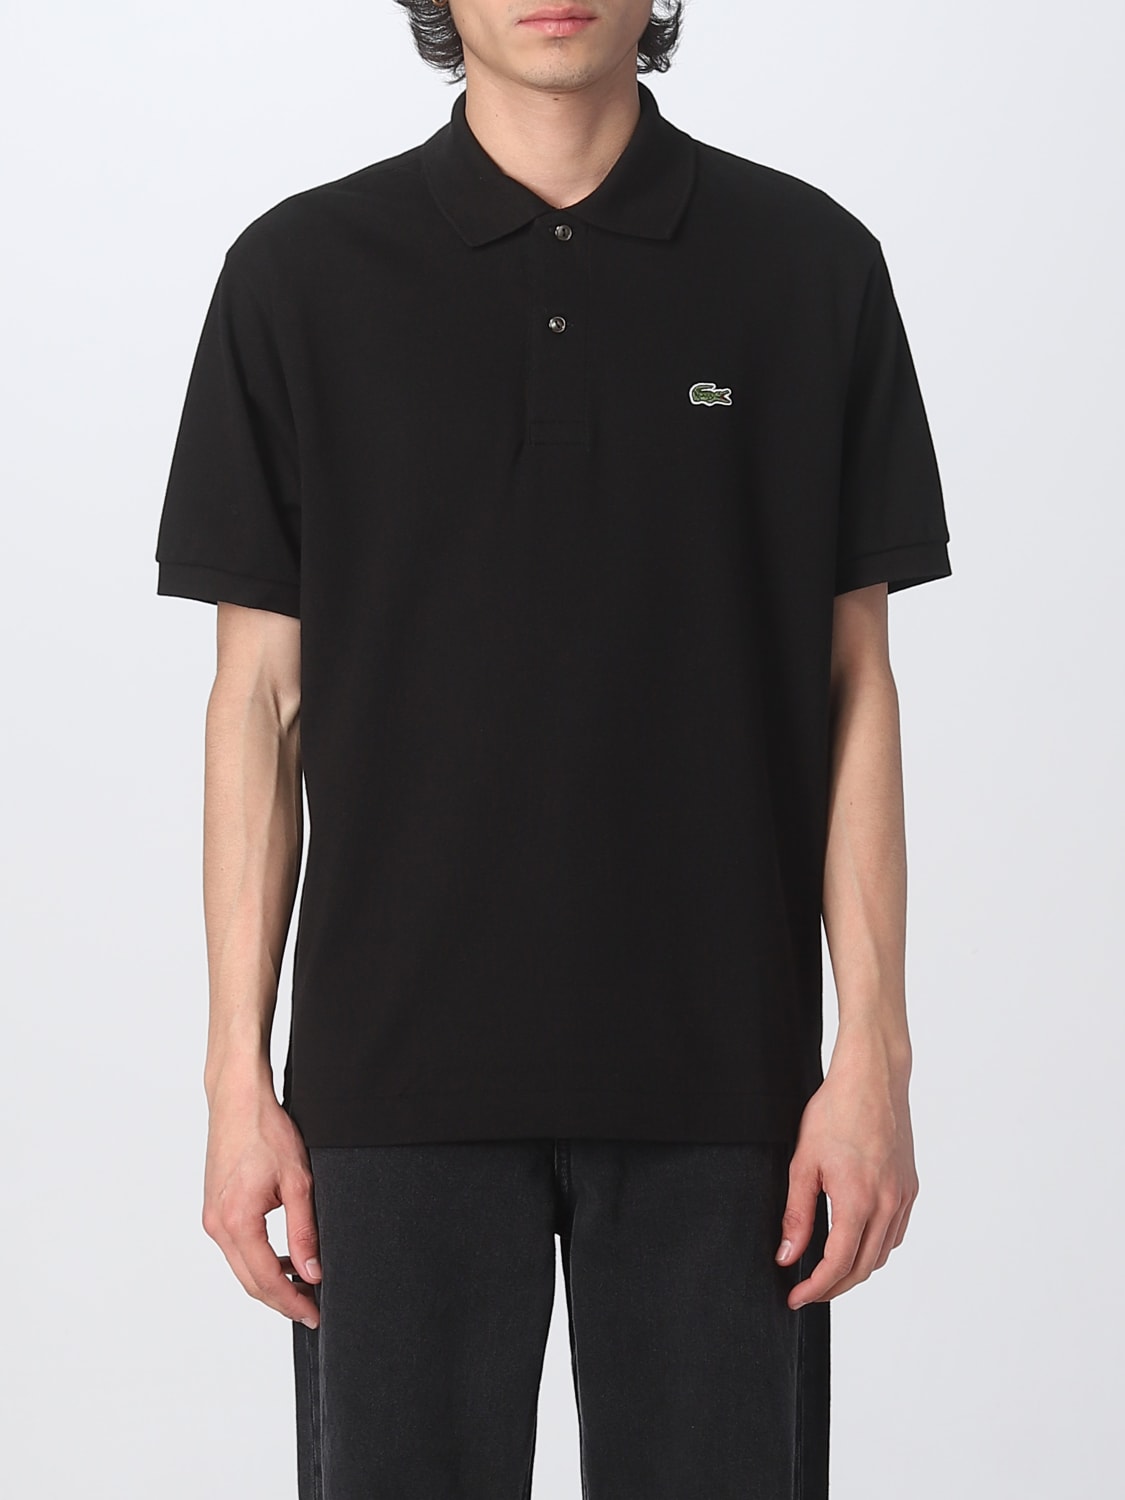 adelig med tiden Konklusion LACOSTE: polo shirt for man - Black | Lacoste polo shirt L1212 online on  GIGLIO.COM